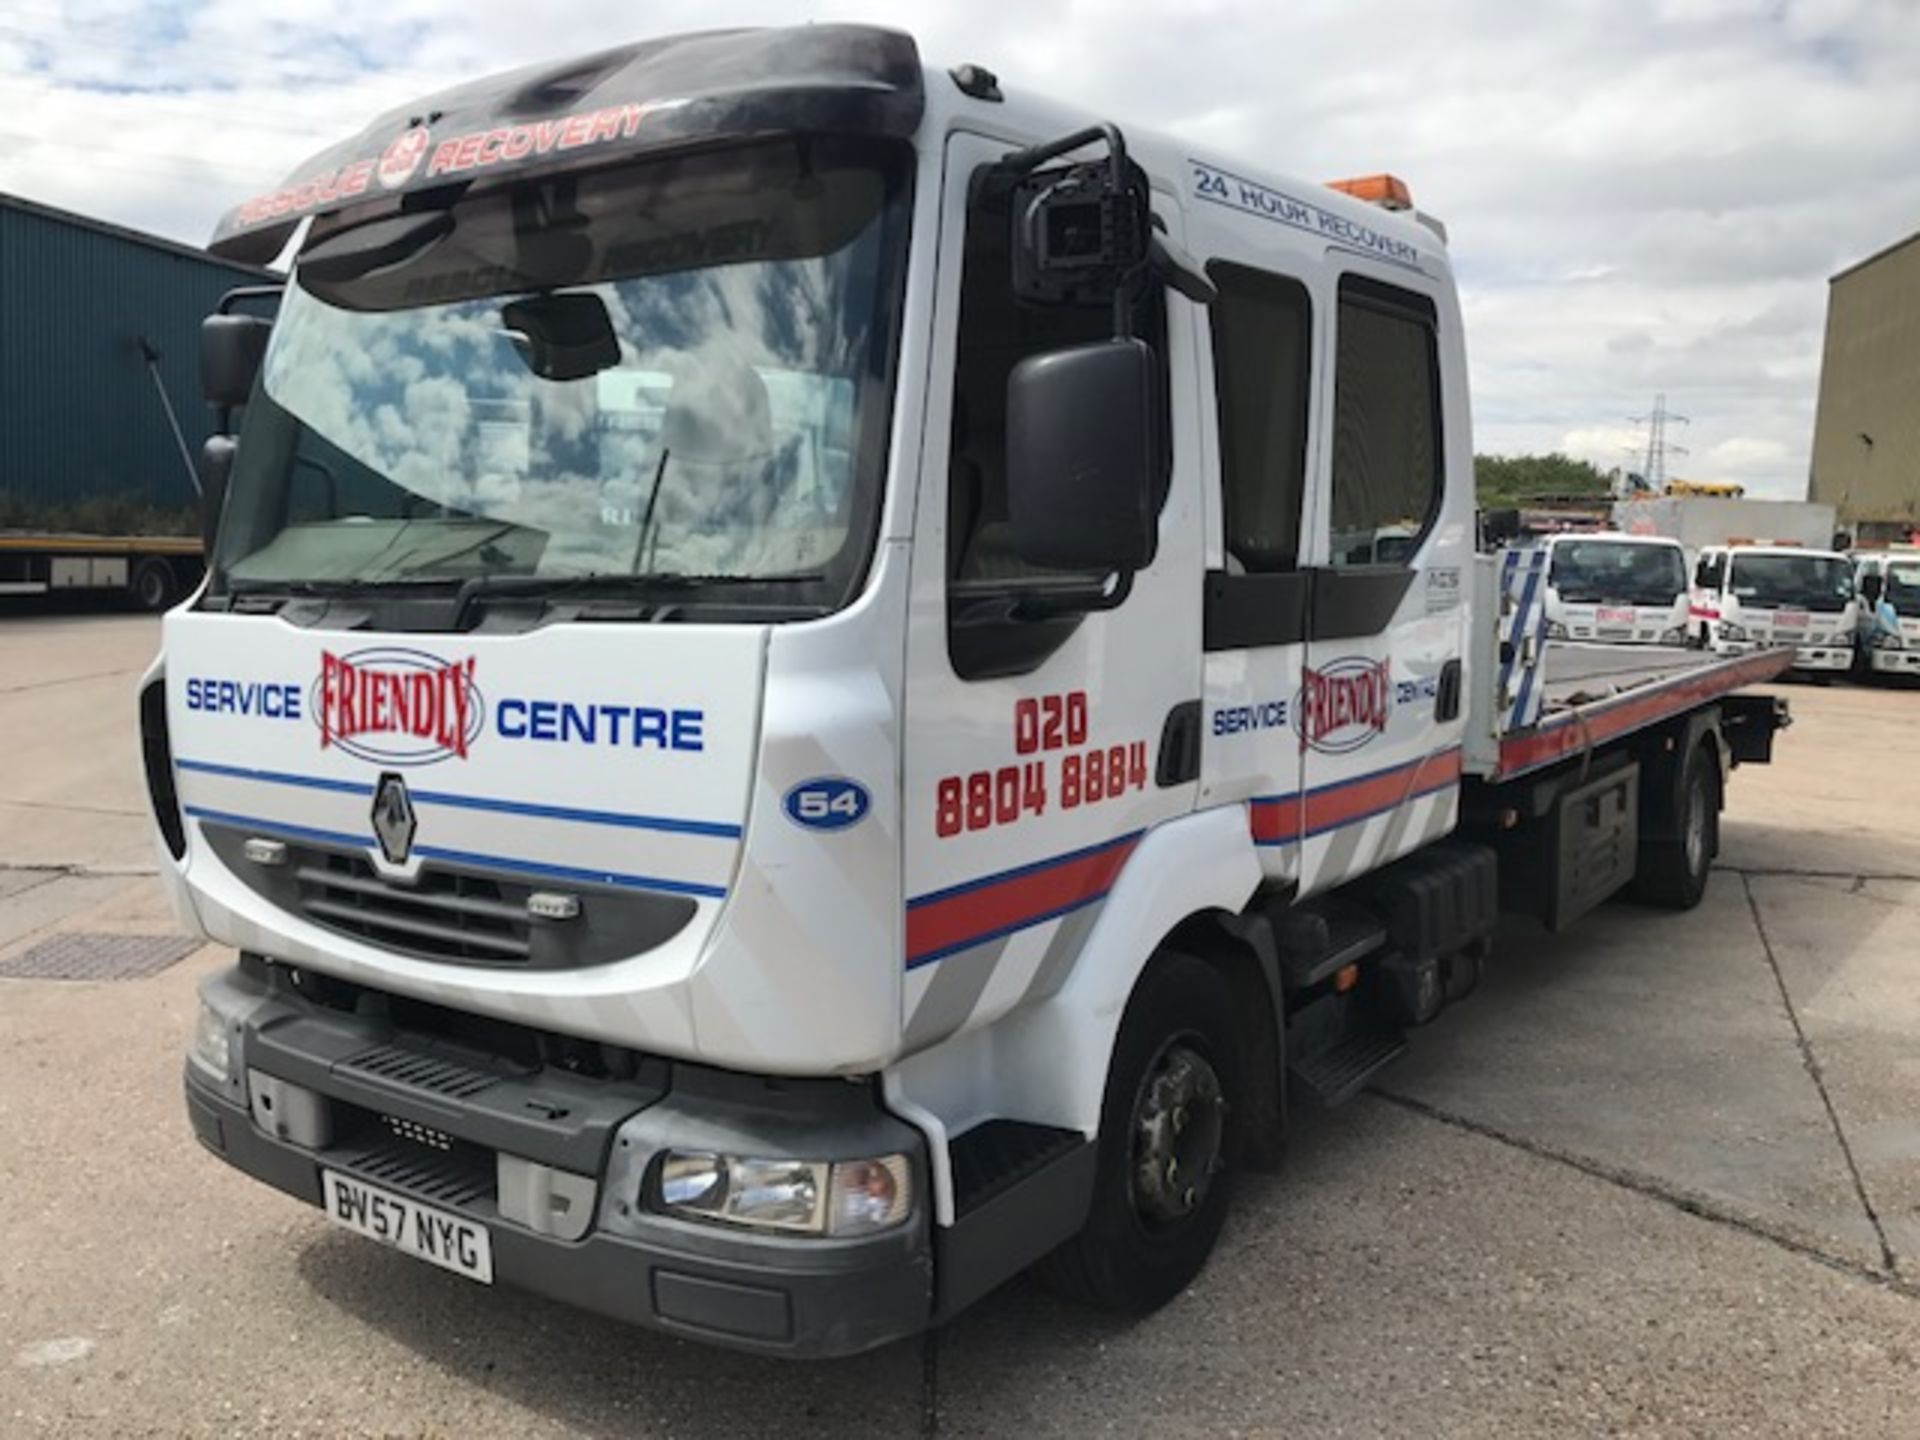 2007 Renault Midlum 10T crew cab breakdown recovery vehiclecomplete with Roger Dyson Group body, - Bild 3 aus 11